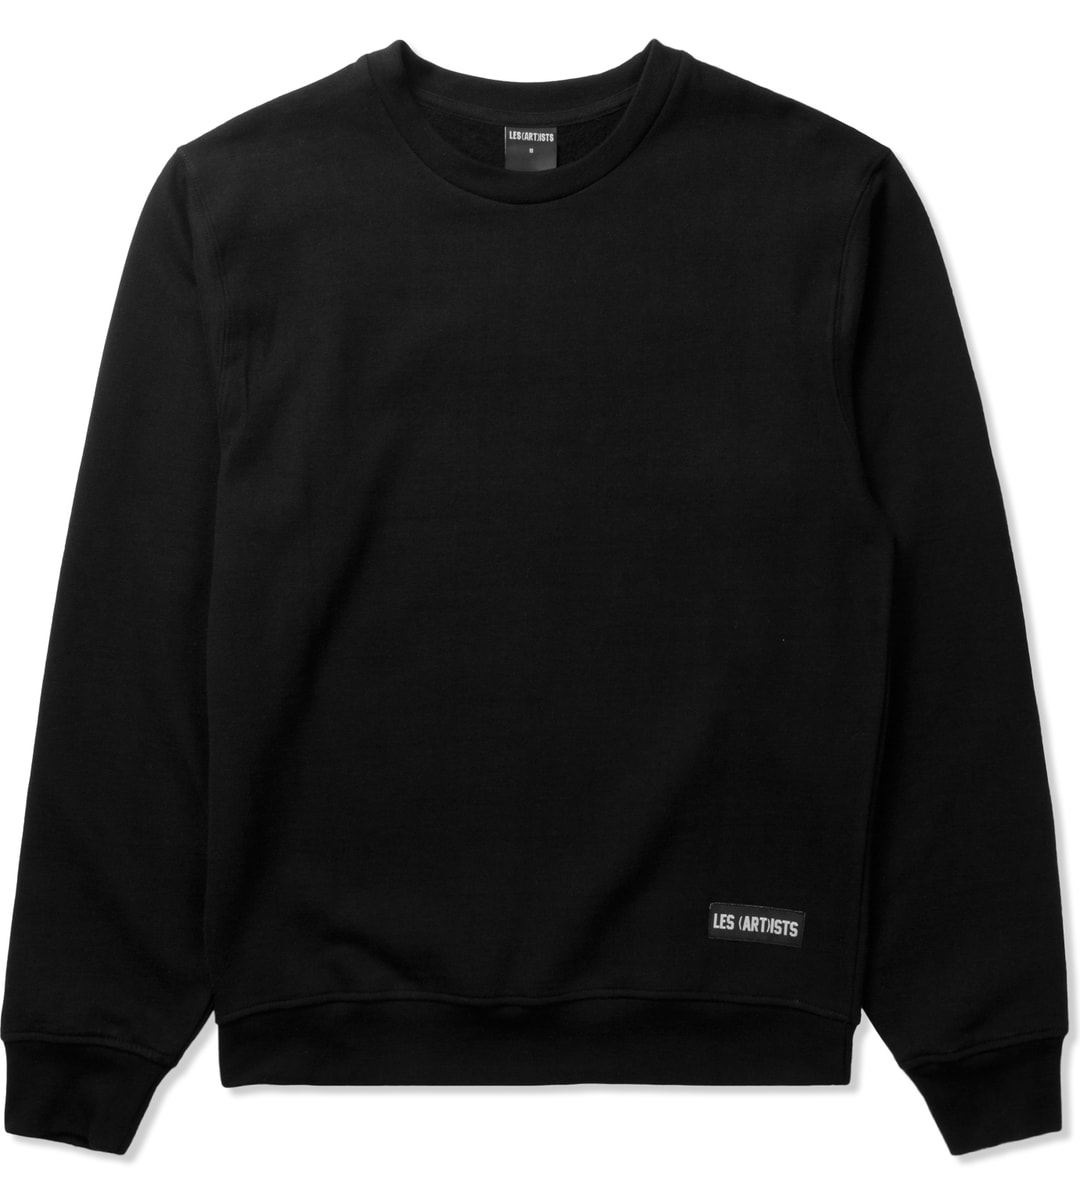 LES (ART)ISTS - Black Basquiat 60 Sweater | HBX - Globally Curated ...